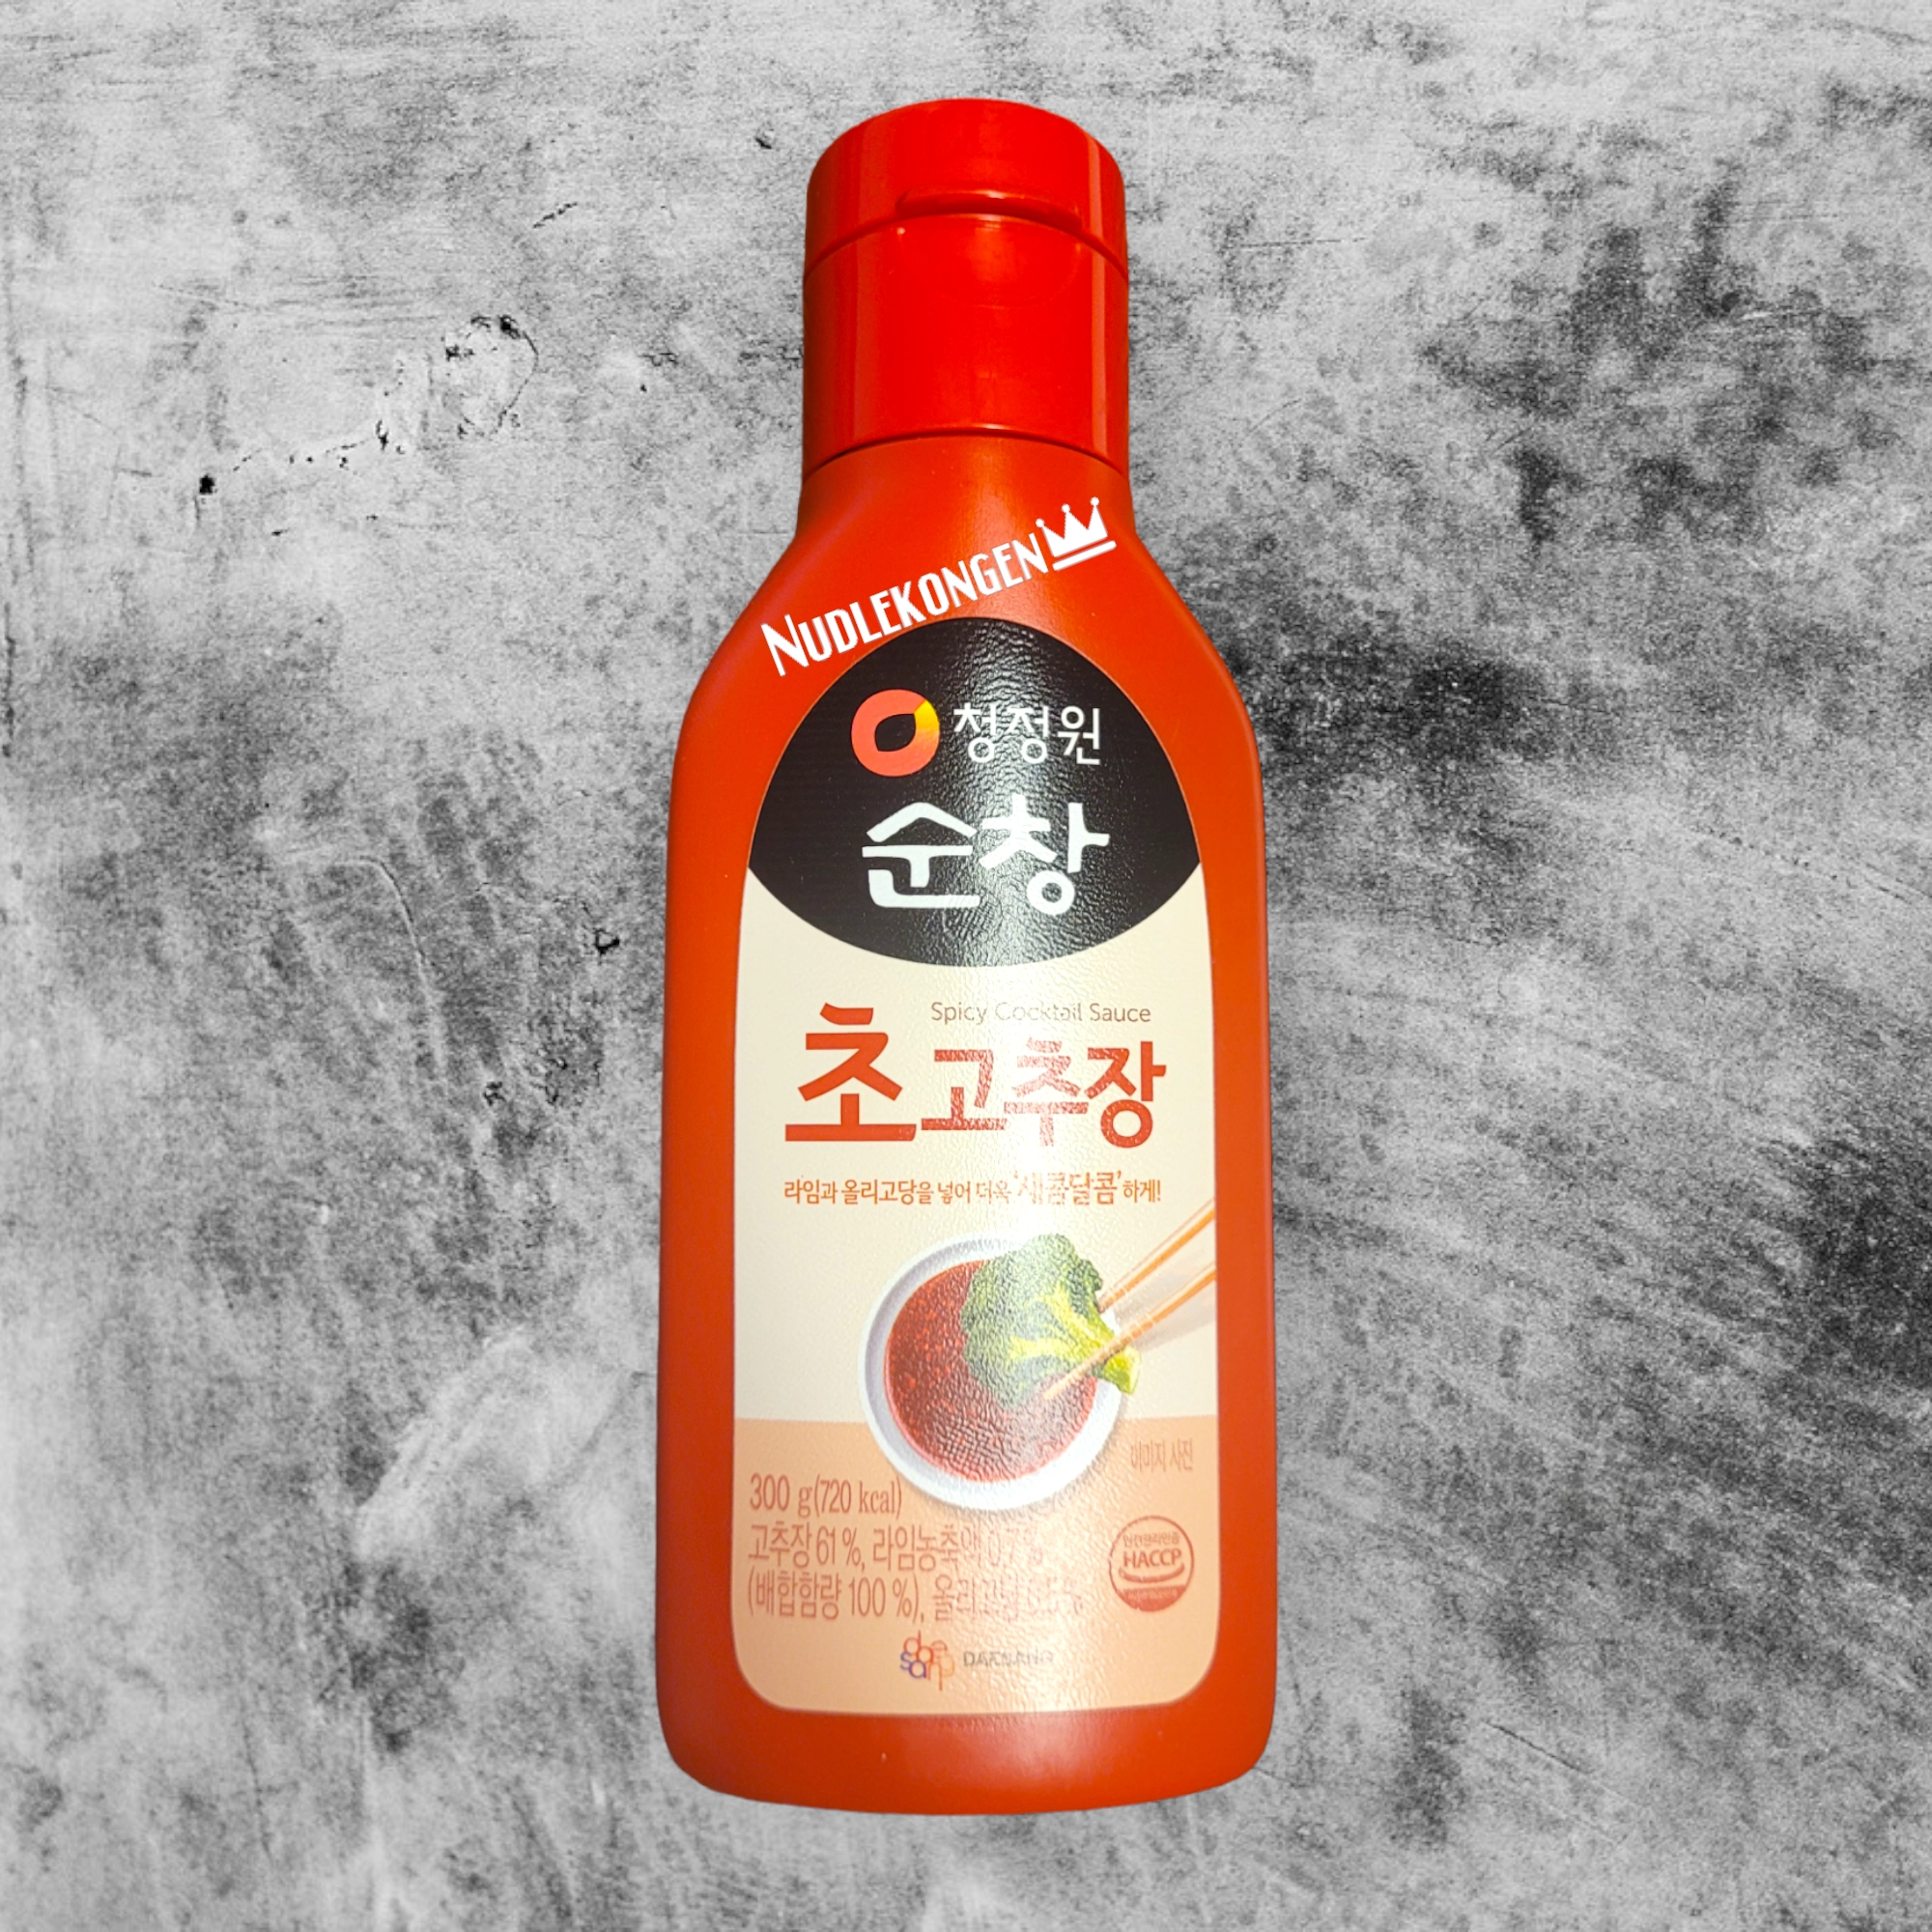 CHUNGJUNGONE SUNCHANG SPICY COCTAIL SAUCE